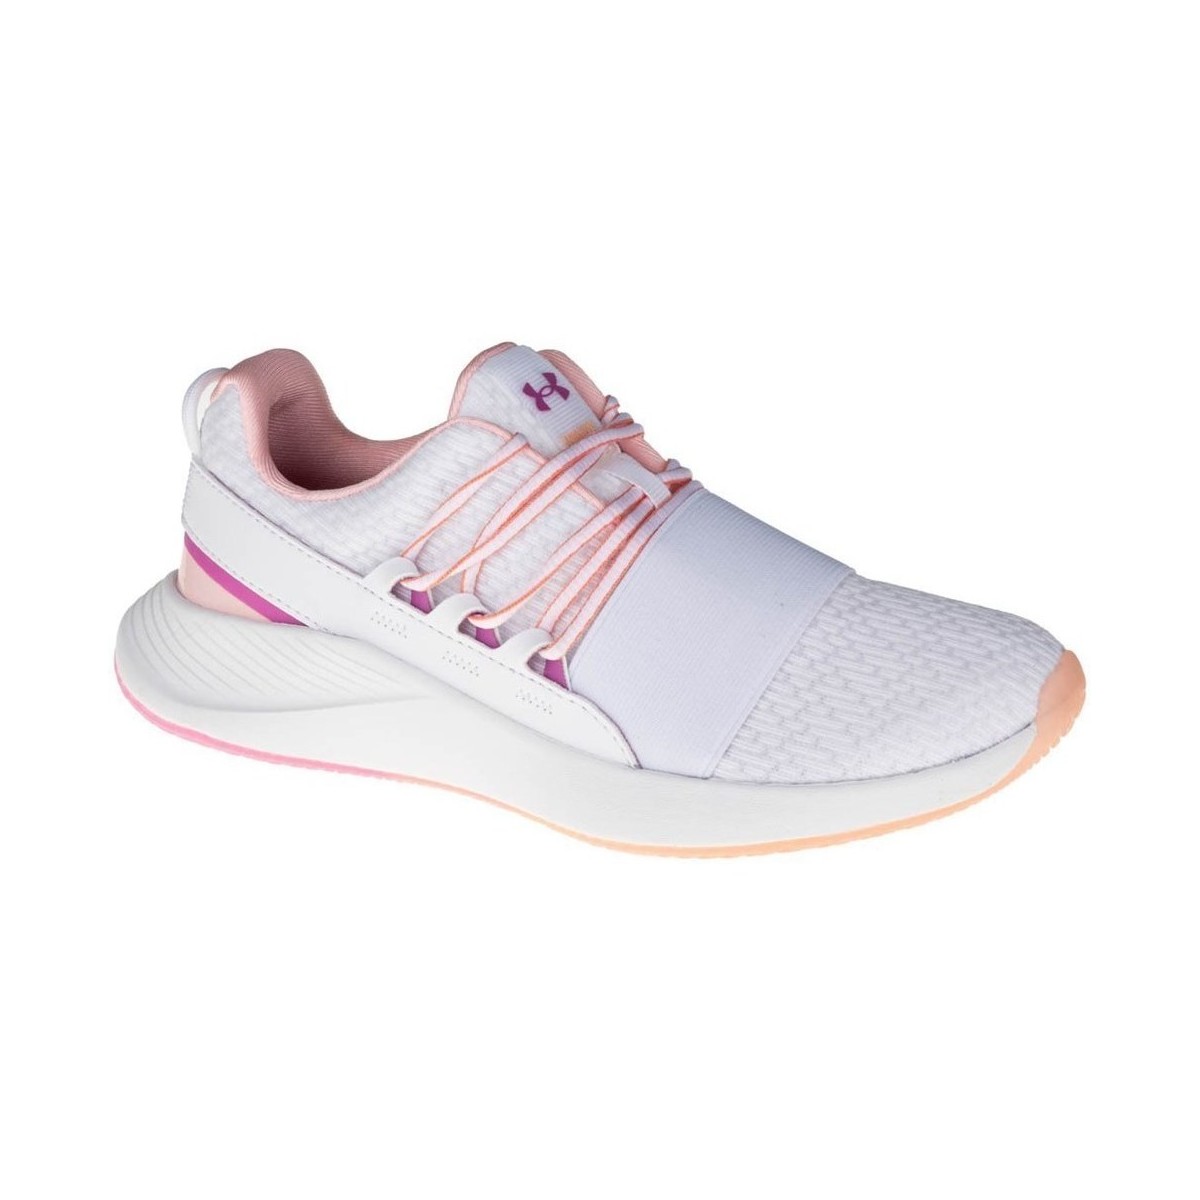 Skor Dam Sneakers Under Armour W Charged Breathe Clr Sft Vit, Rosa